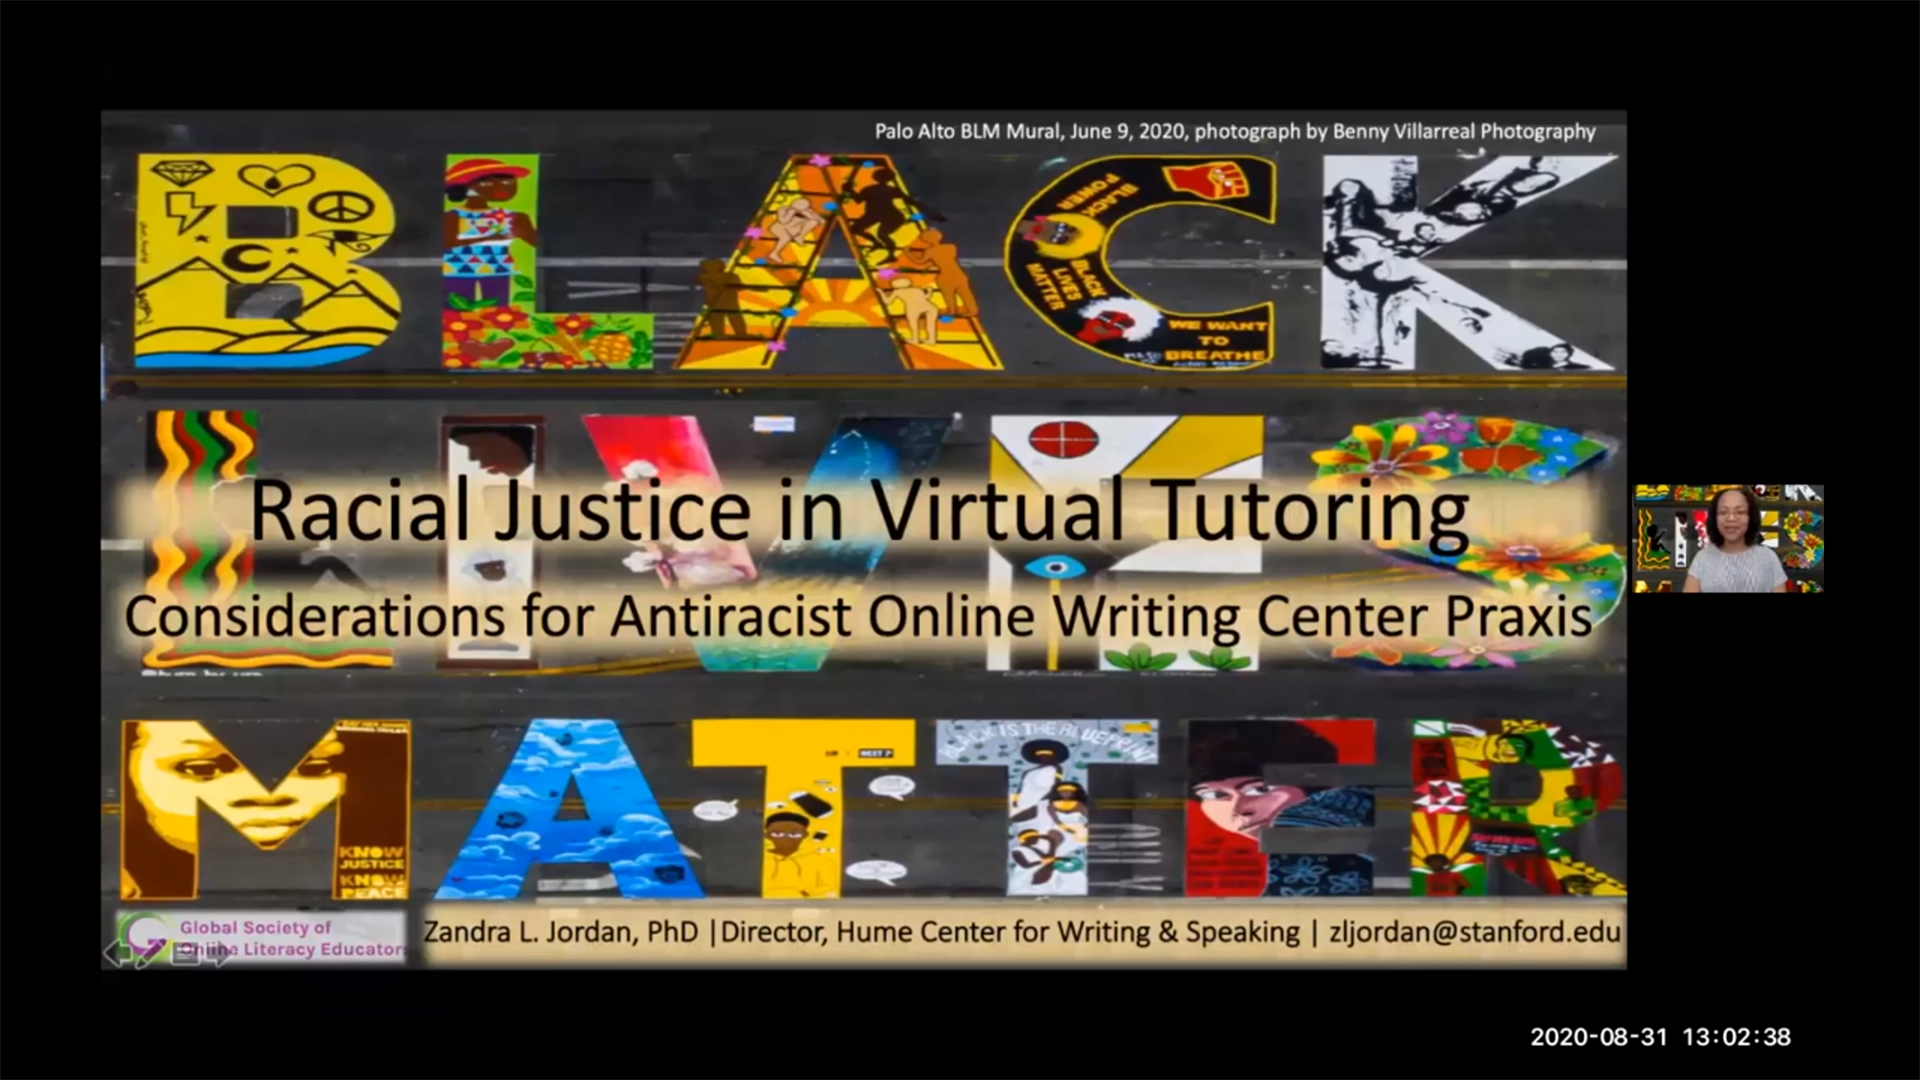 Webinar Screen Capture: Slide title "Starting, Evaluating or Revamping Online Tutoring in Your Writing Center"; pictures of participant cam images appear on right.